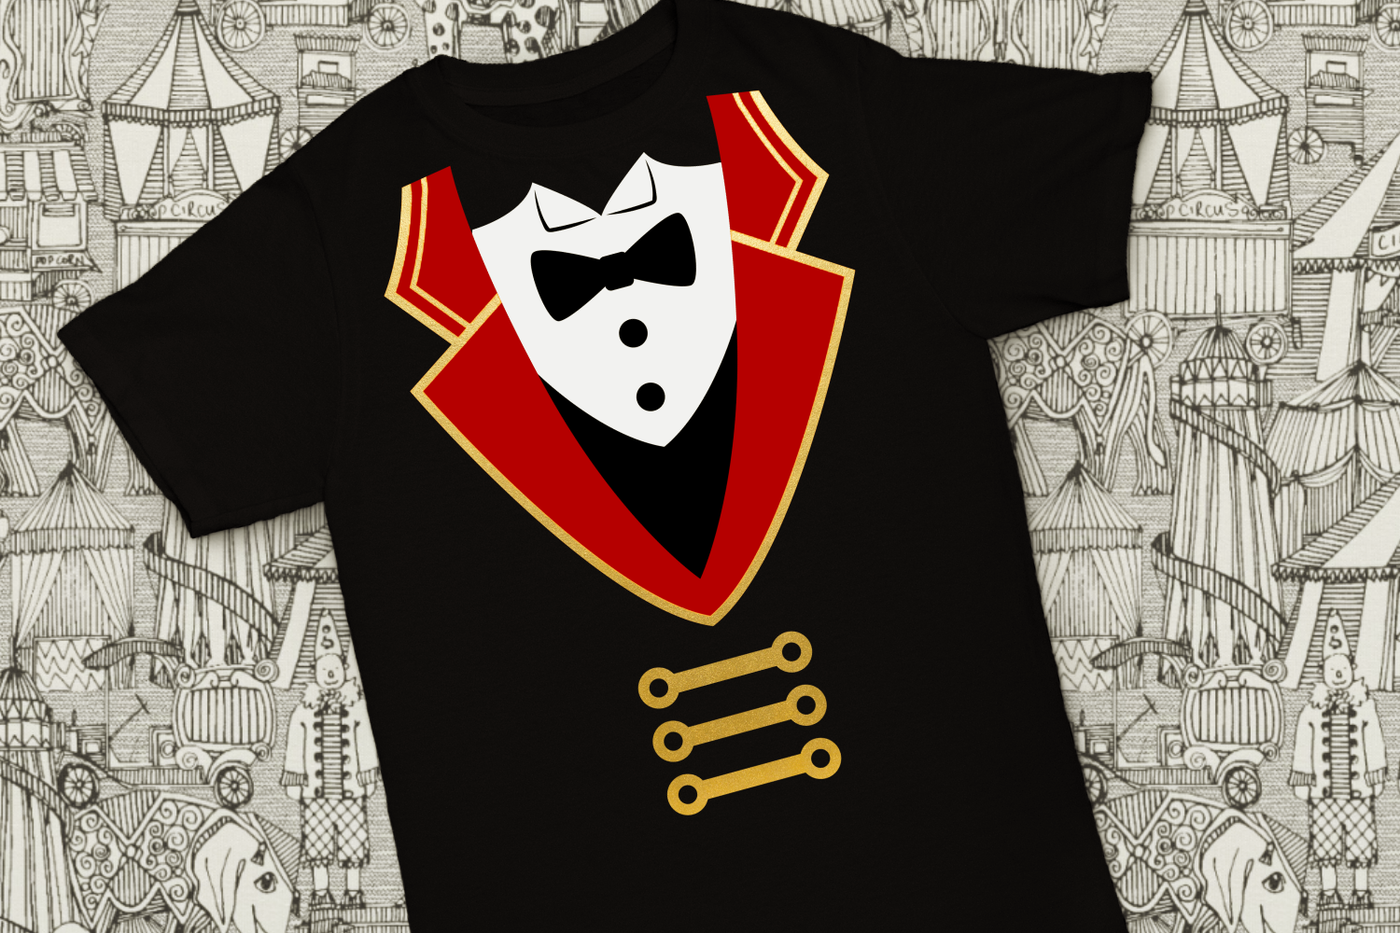 A black tee decorated to look like a ringmaster's outfit.